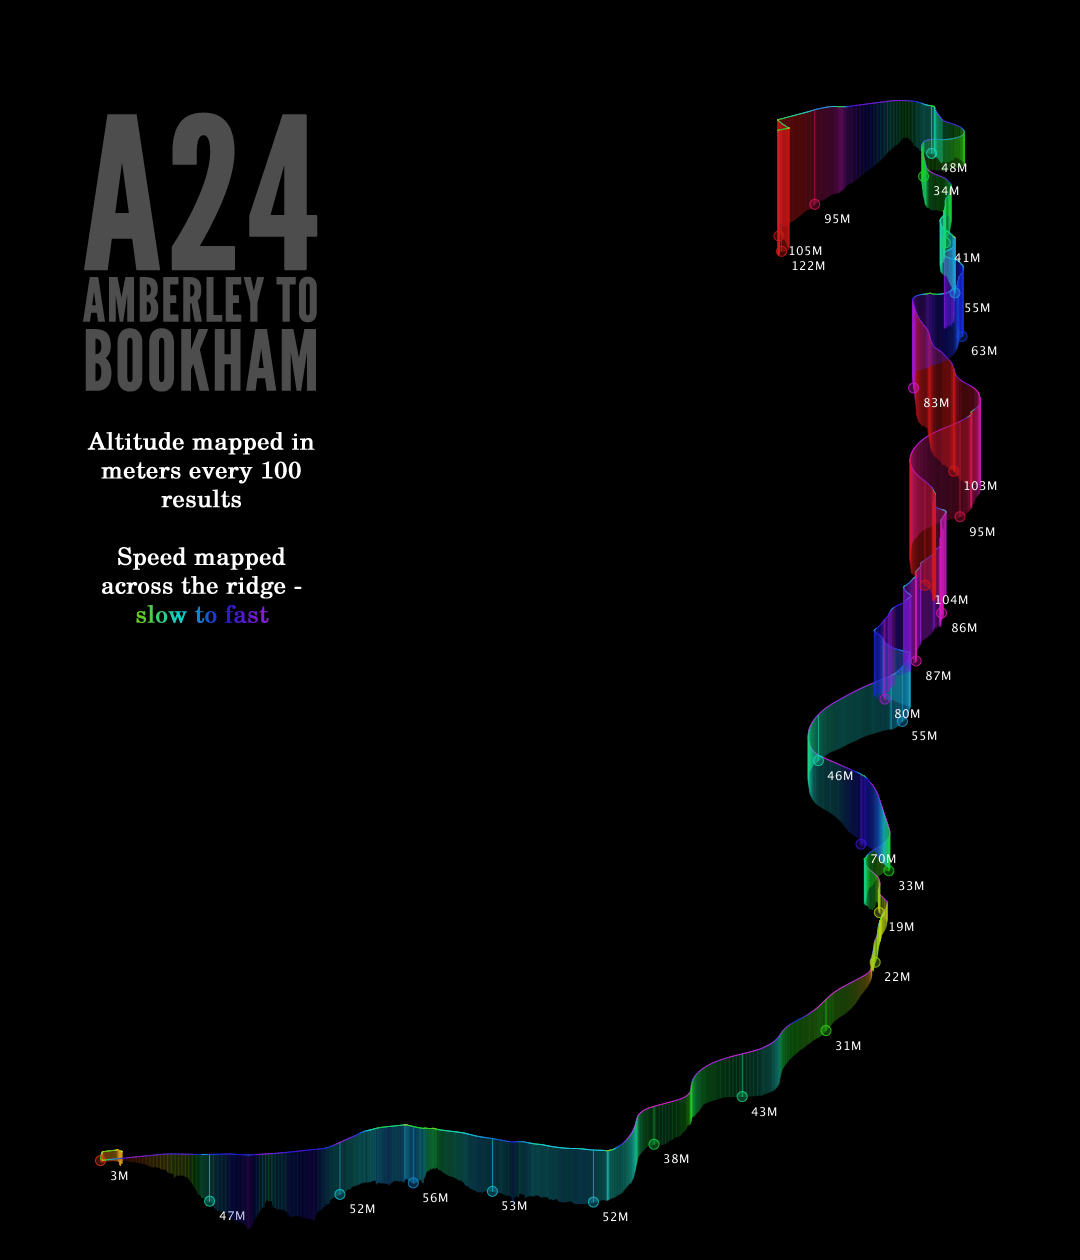 The A24 mapped for altitude and speed